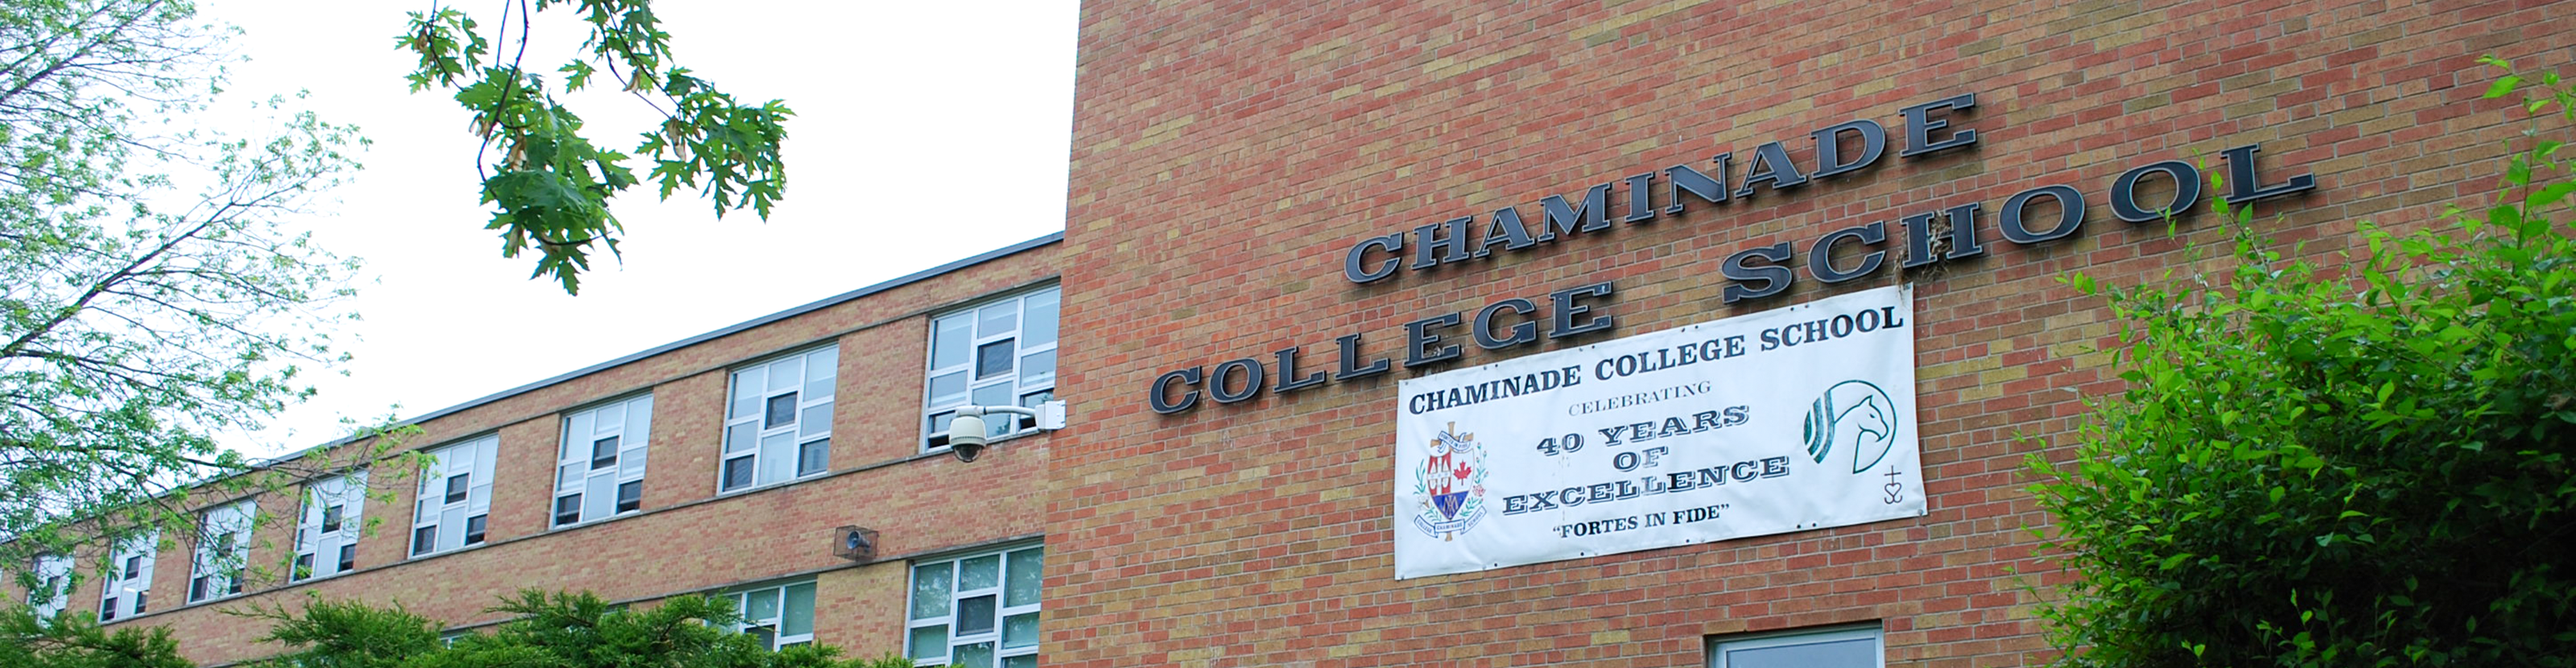 The front of the Chaminade College school building.